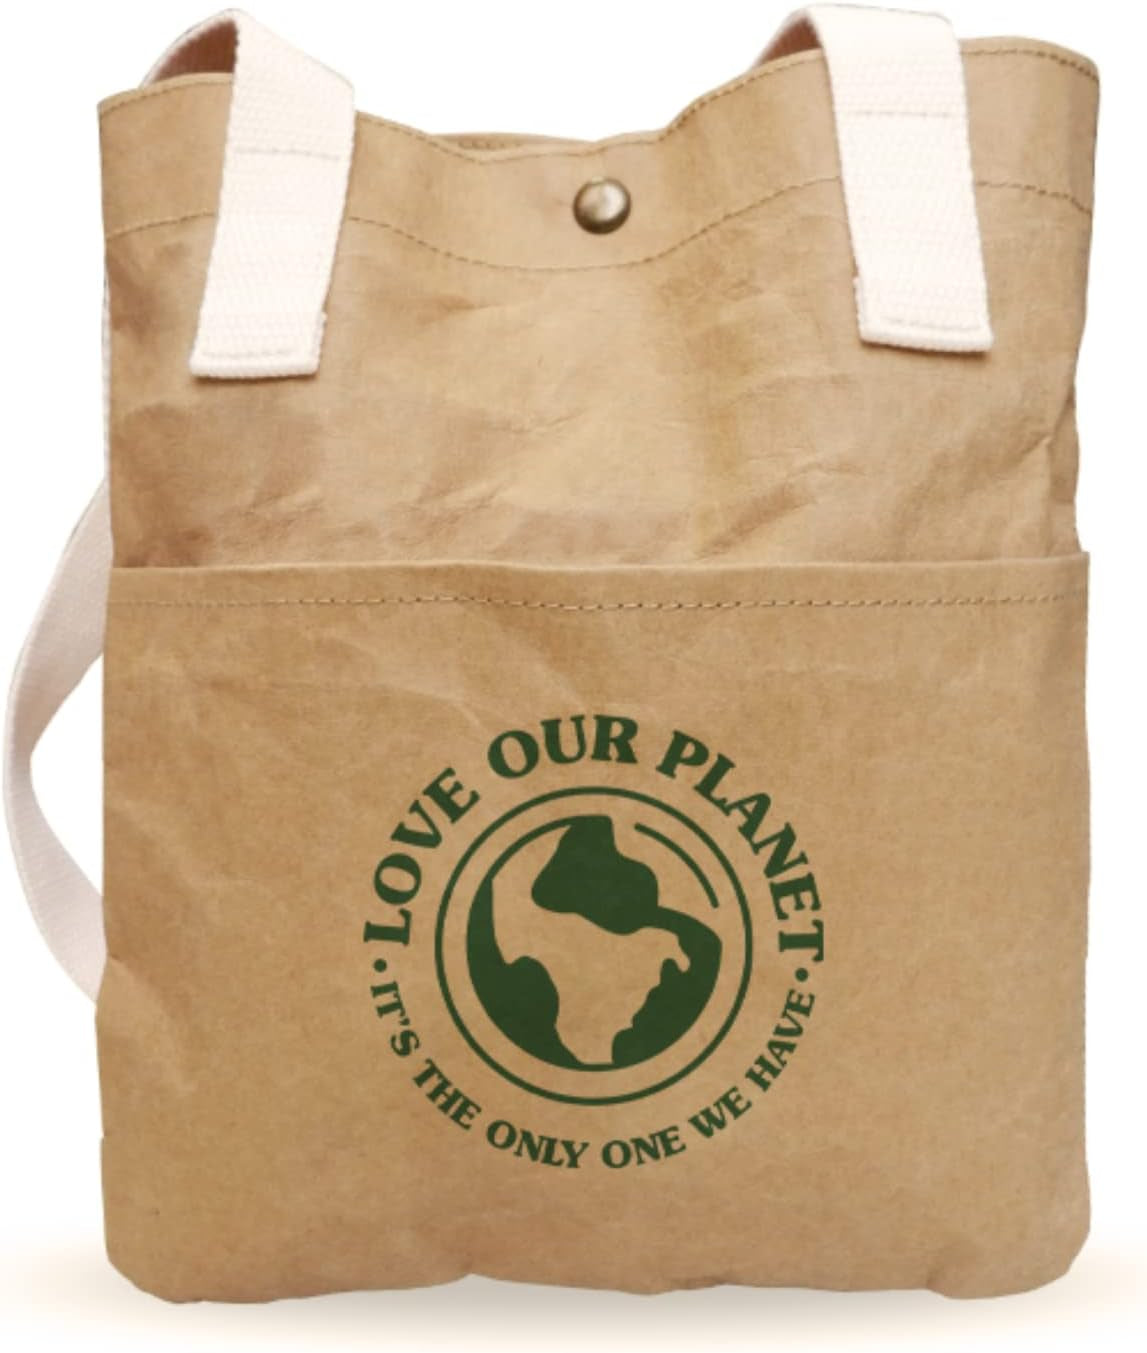 Reusable Grocery Lunch Bag – Sustainable & Eco Friendly Washable Paper Totes with Cotton Canvas Handles & Durable Seams